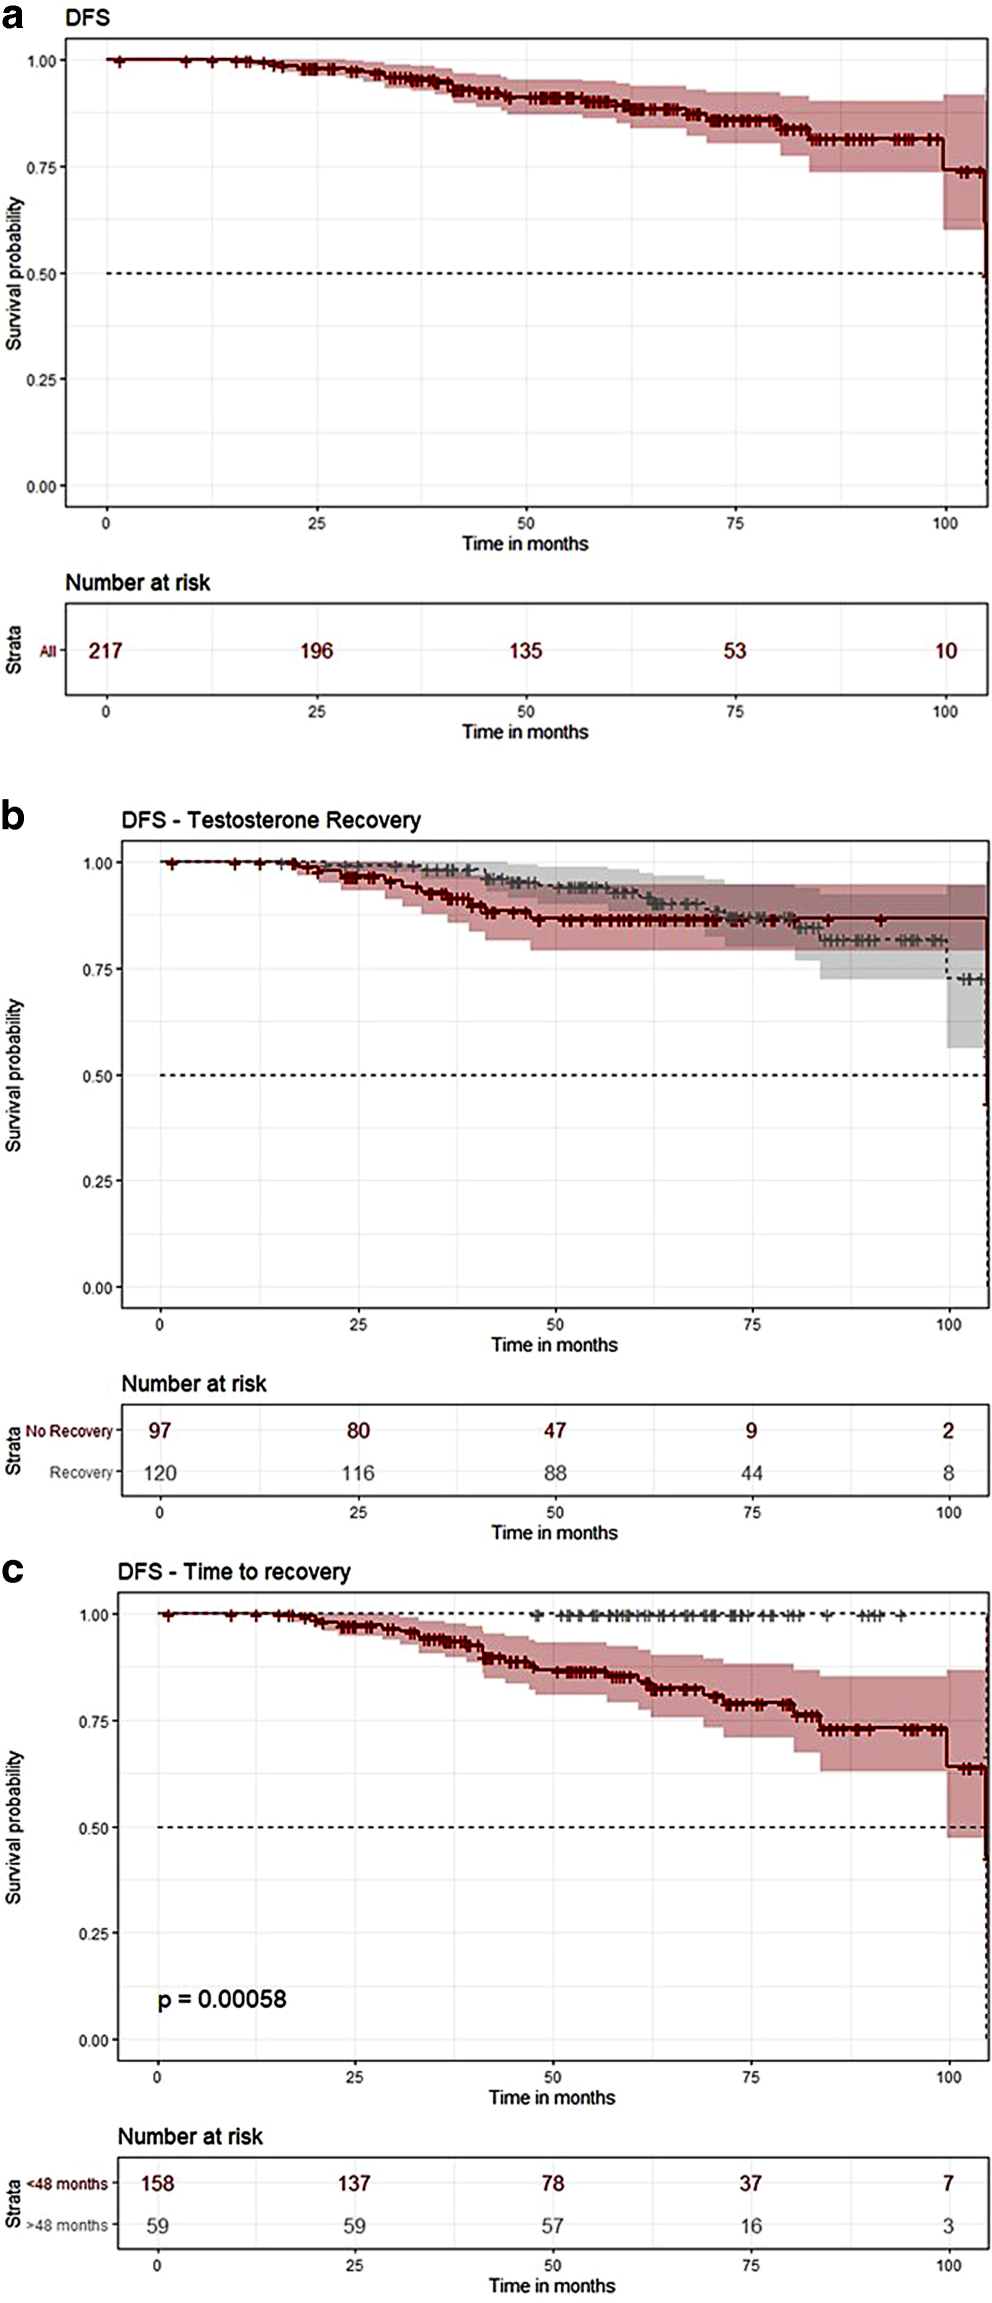 Longer time to testosterone recovery impacts favorably on outcomes for prostate cancer following androgen deprivation and radiotherapy